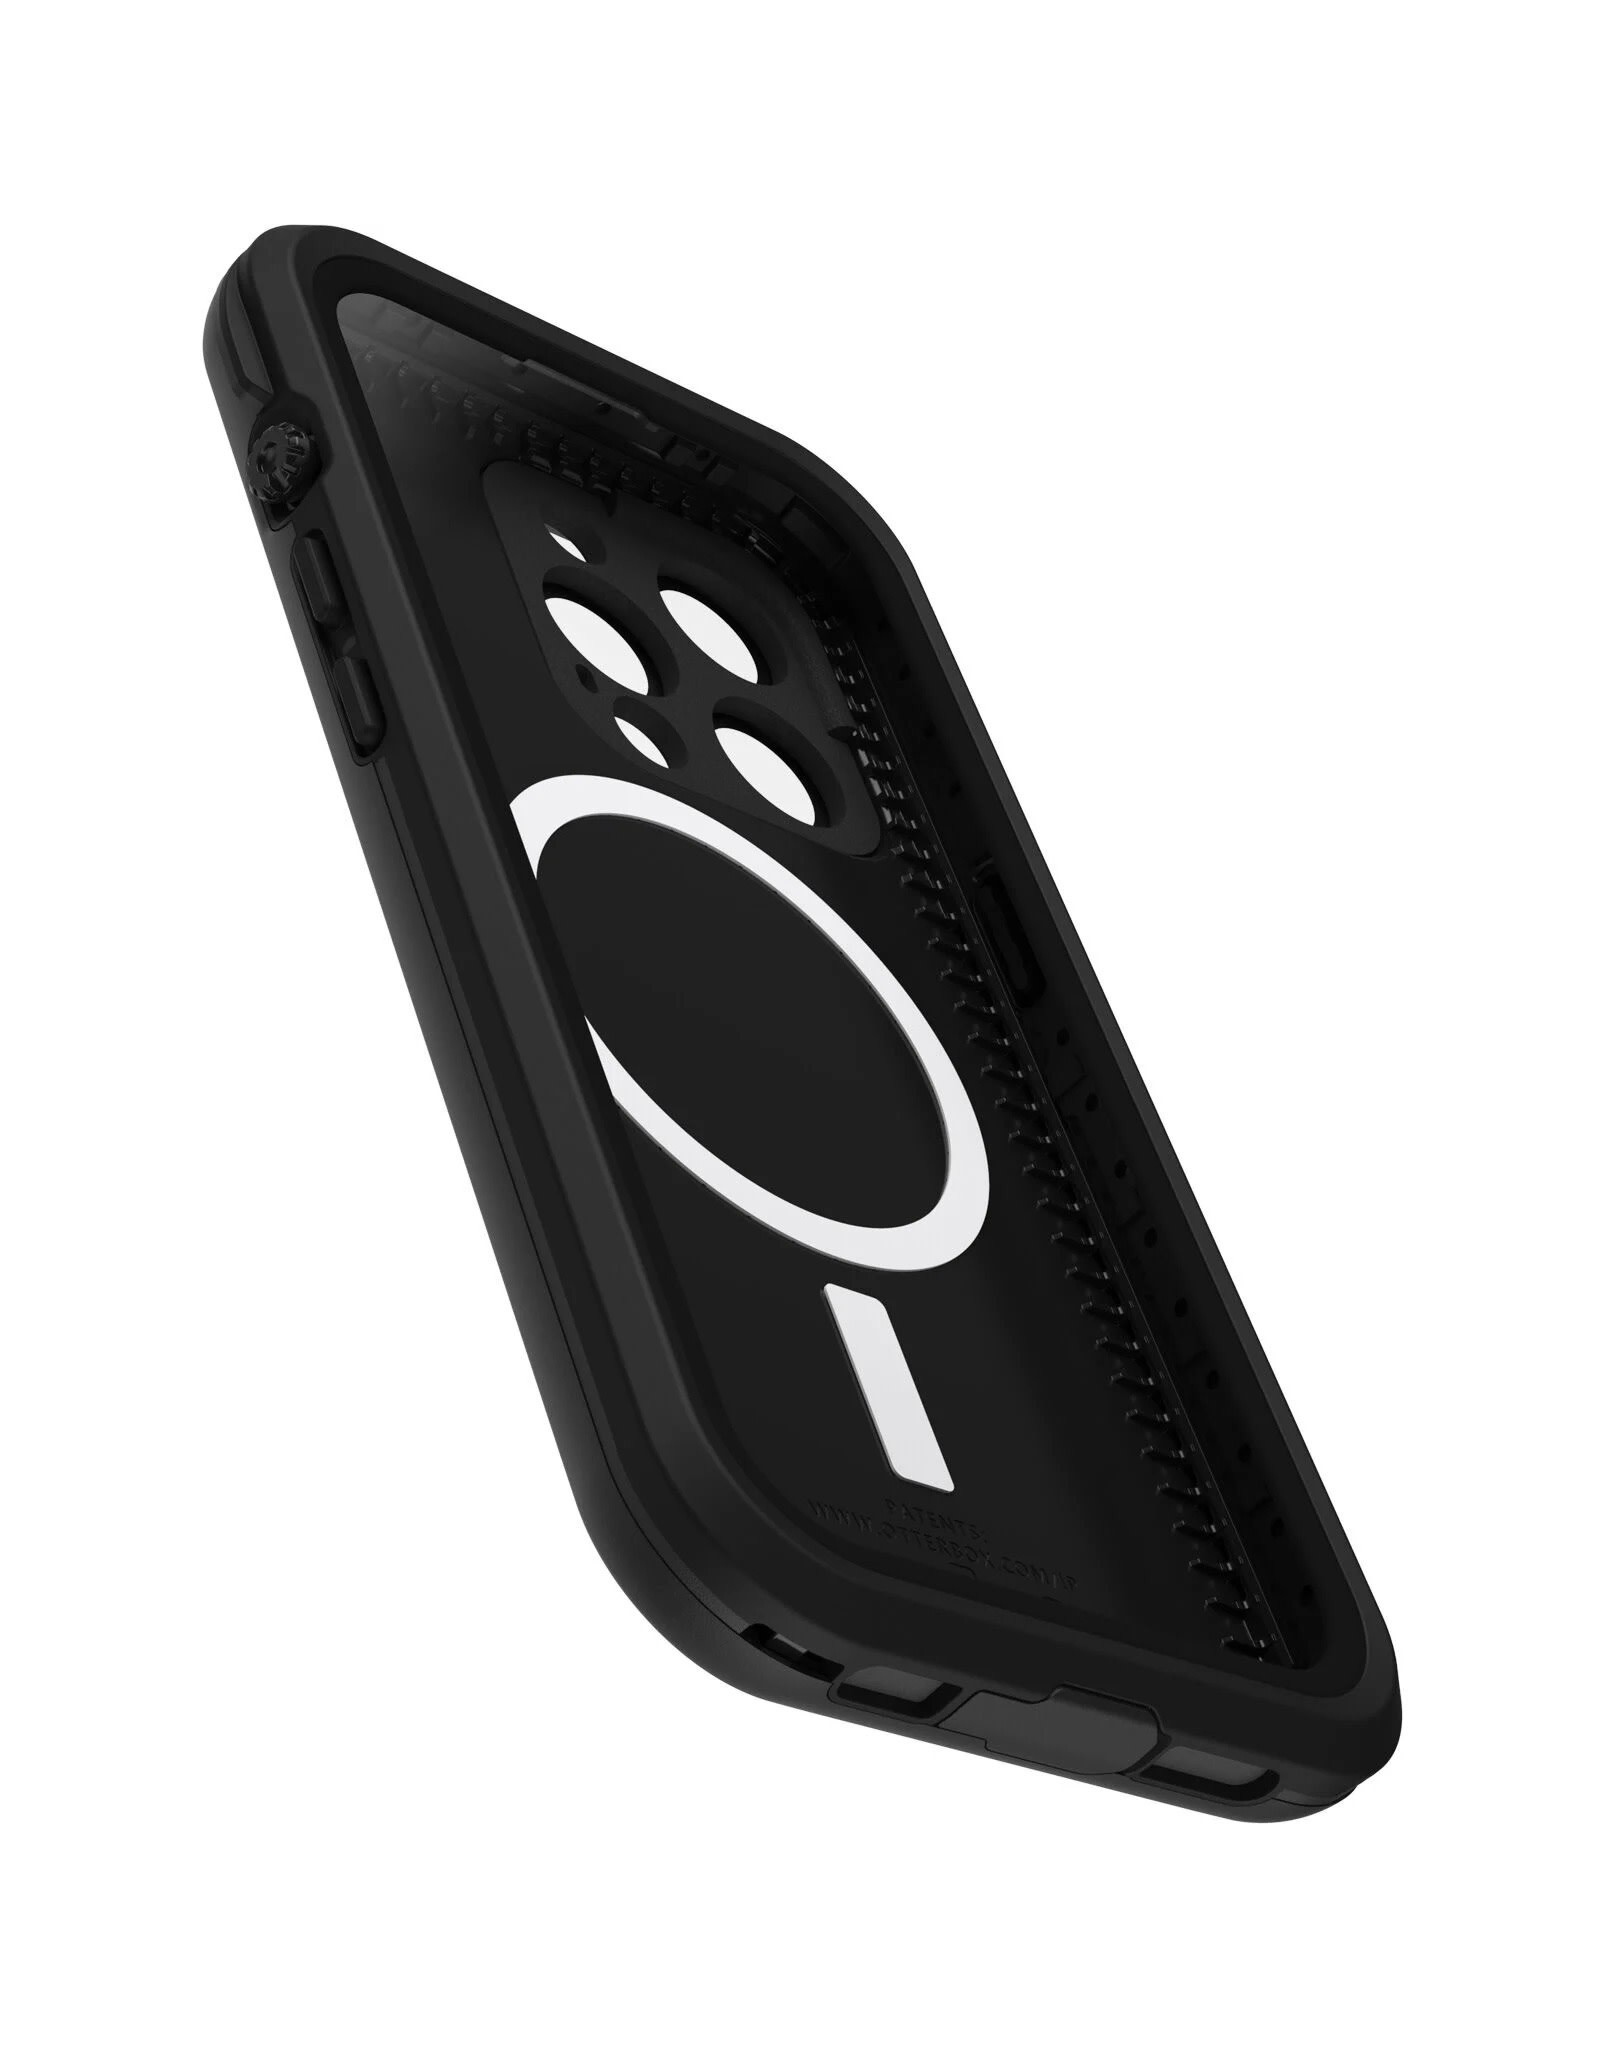 Otterbox Otterbox Fre MagSafe Case Black suits iPhone 14 Pro